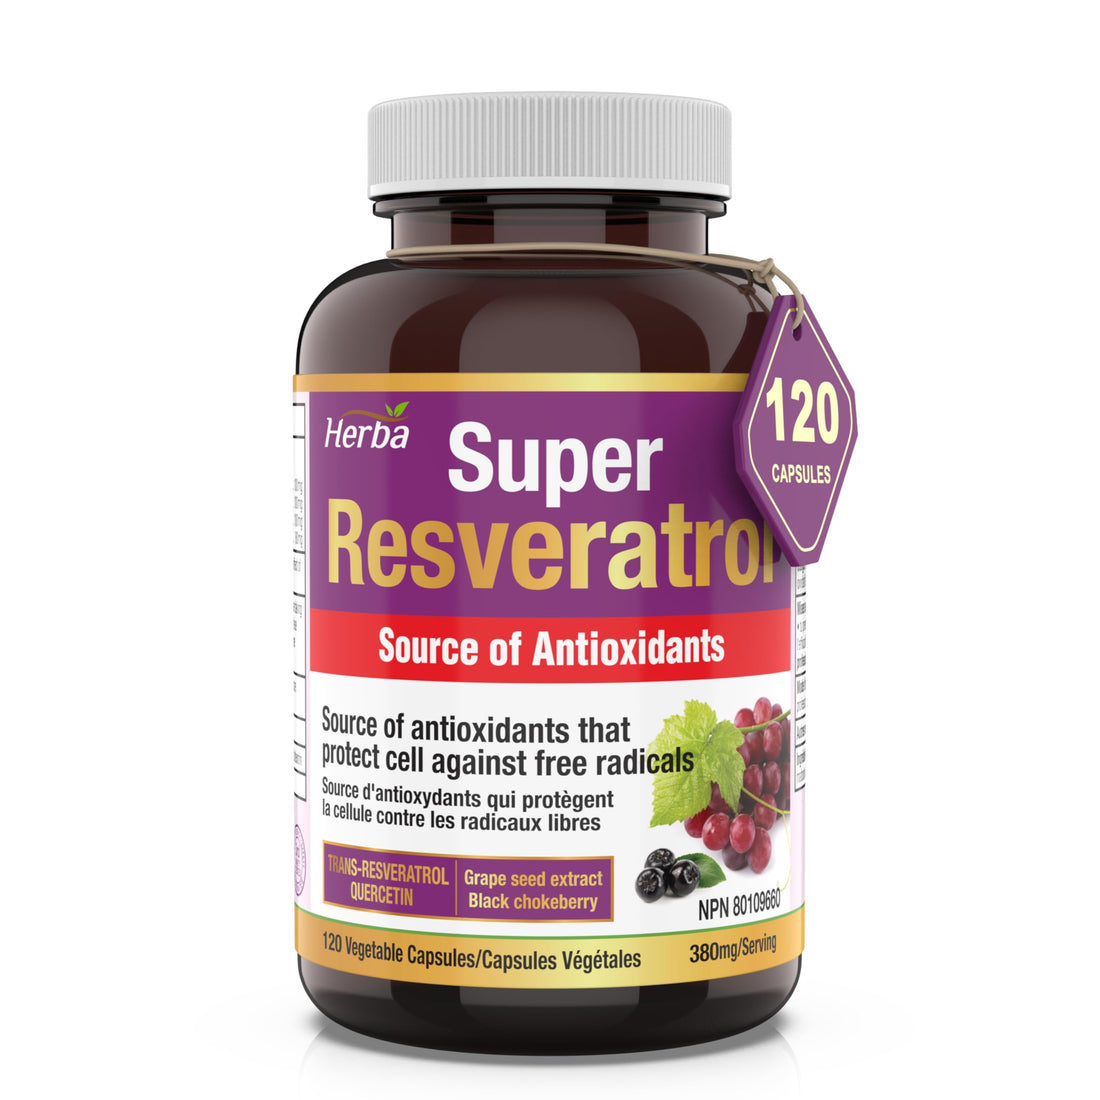 buy resveratrol supplement made in Canada